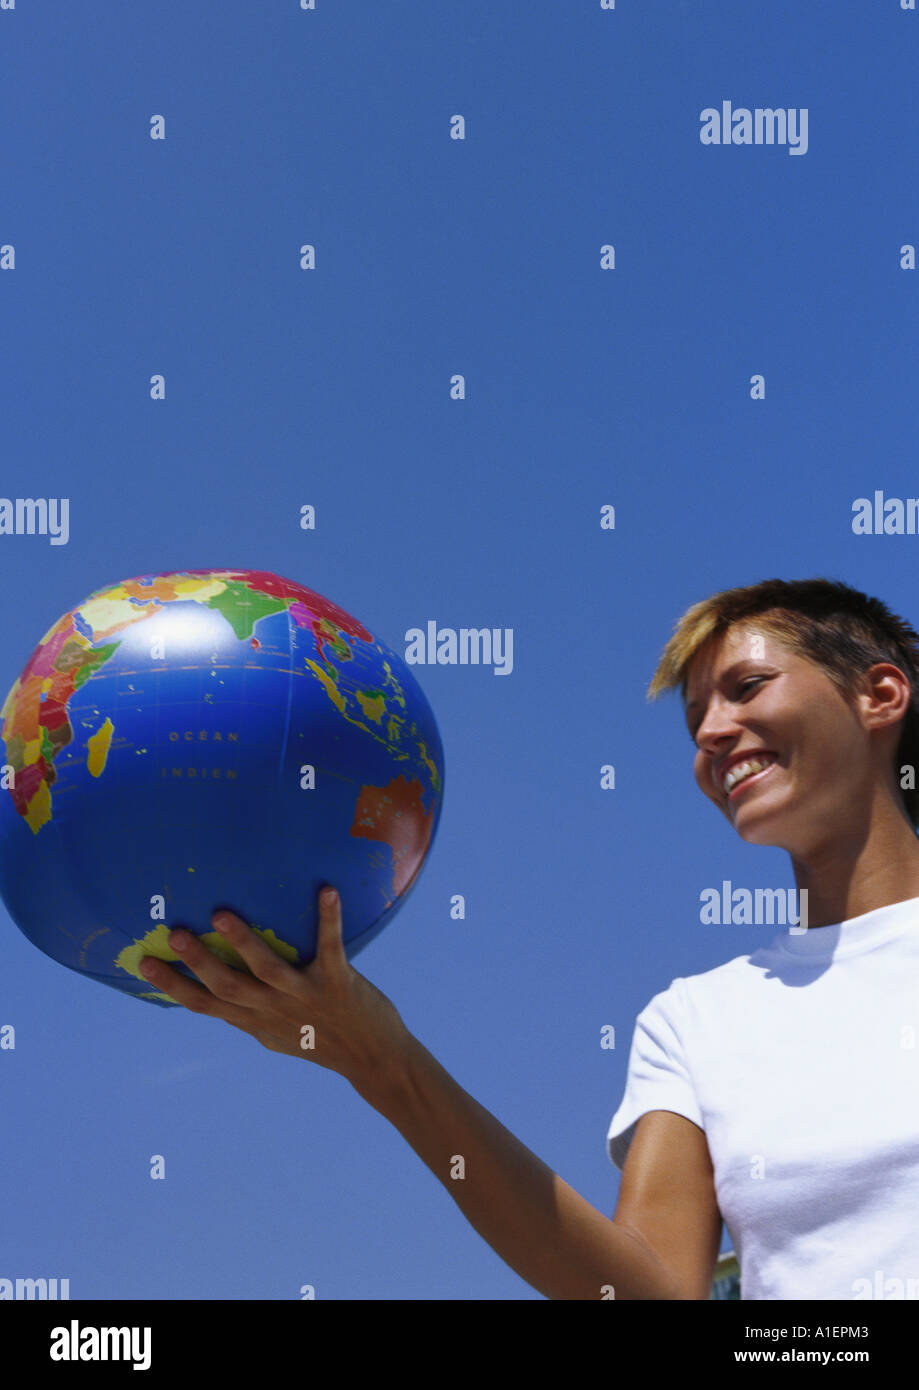 Young woman holding globe Banque D'Images